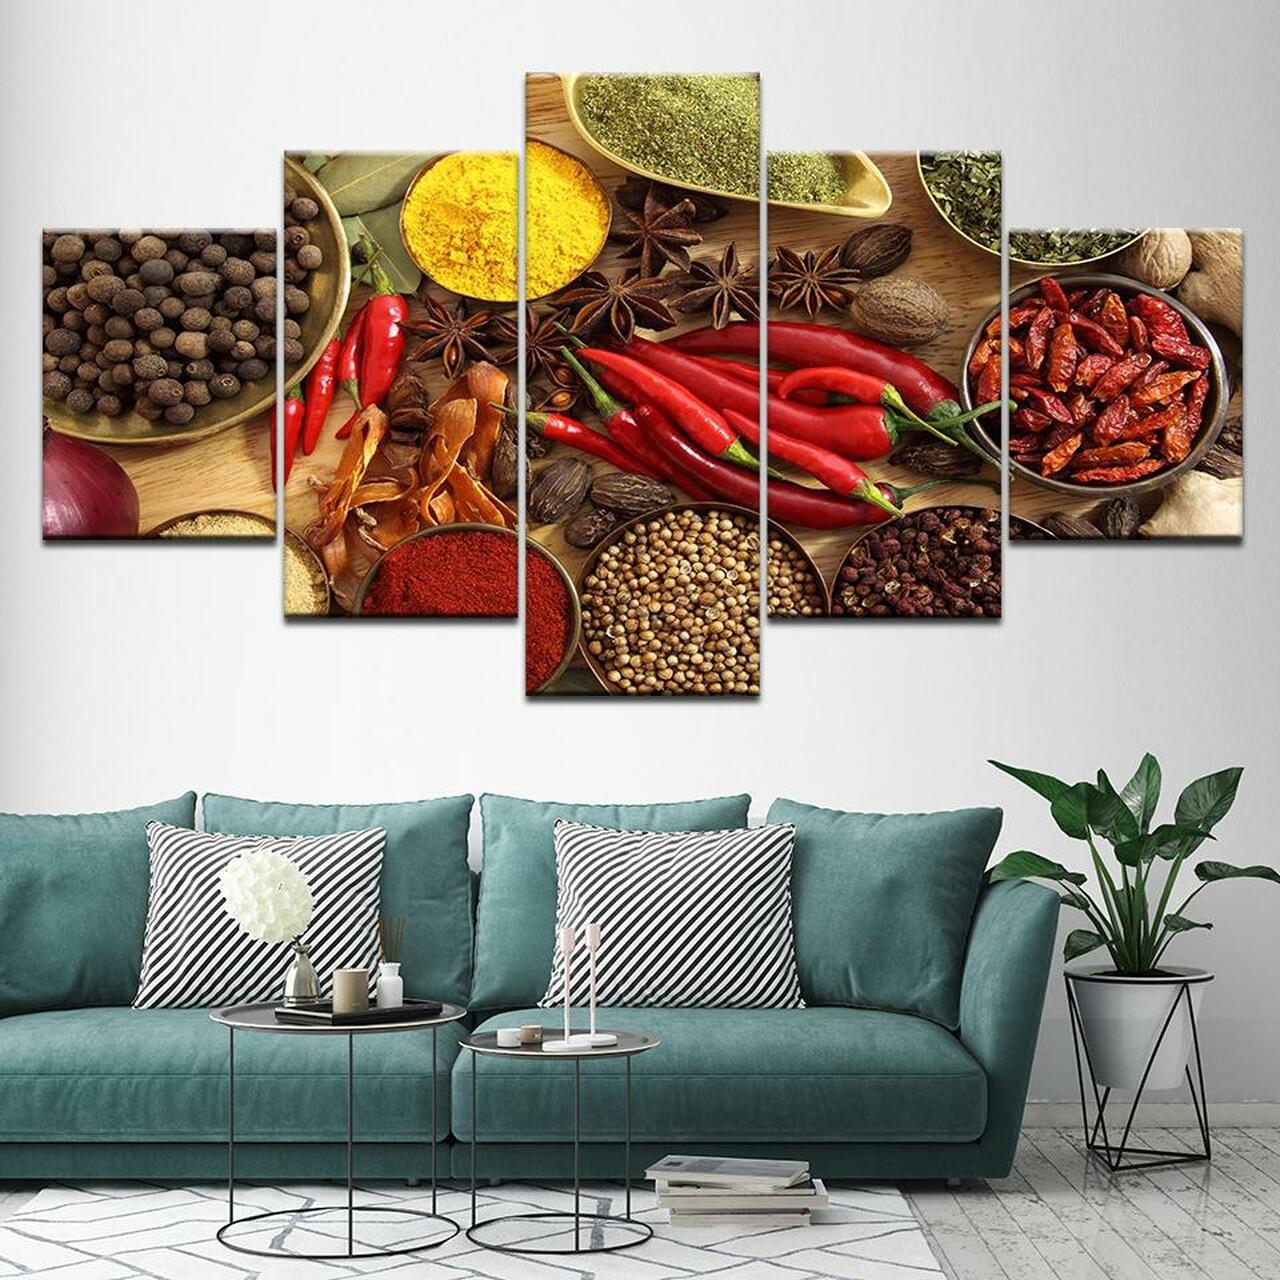 RED CHILIES AND SPICES 5 Piece Canvas Art Wall Decor